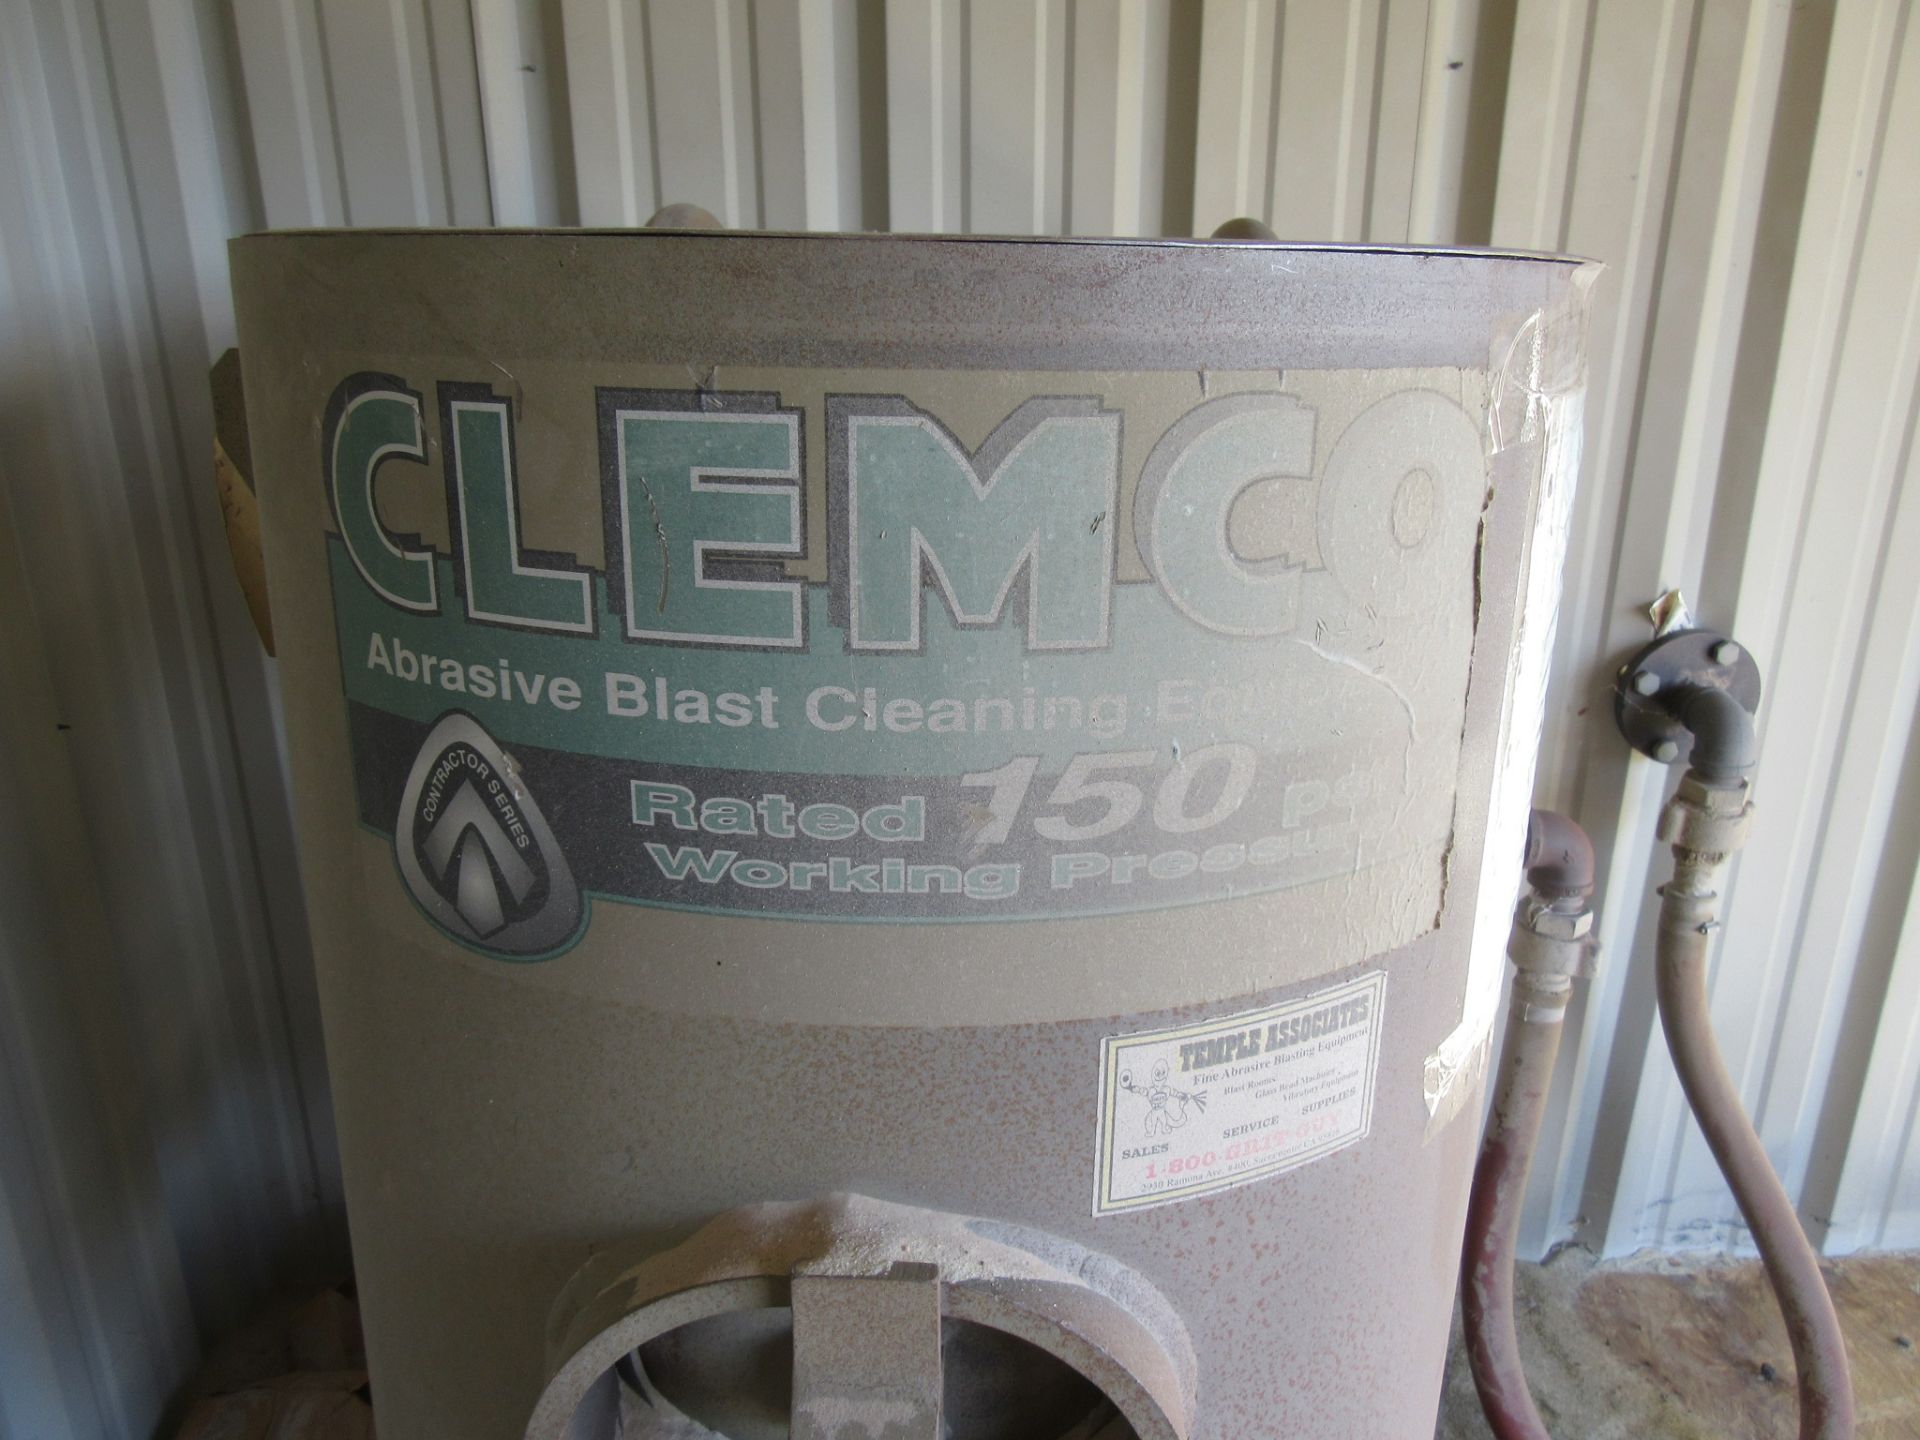 CLEMCO 2024 ABRASIVE BLAST, RATED 150 PSI WORKING PRESSURE, 6.0 CF CAPACITY, (BACK BUILDING) - Image 2 of 4